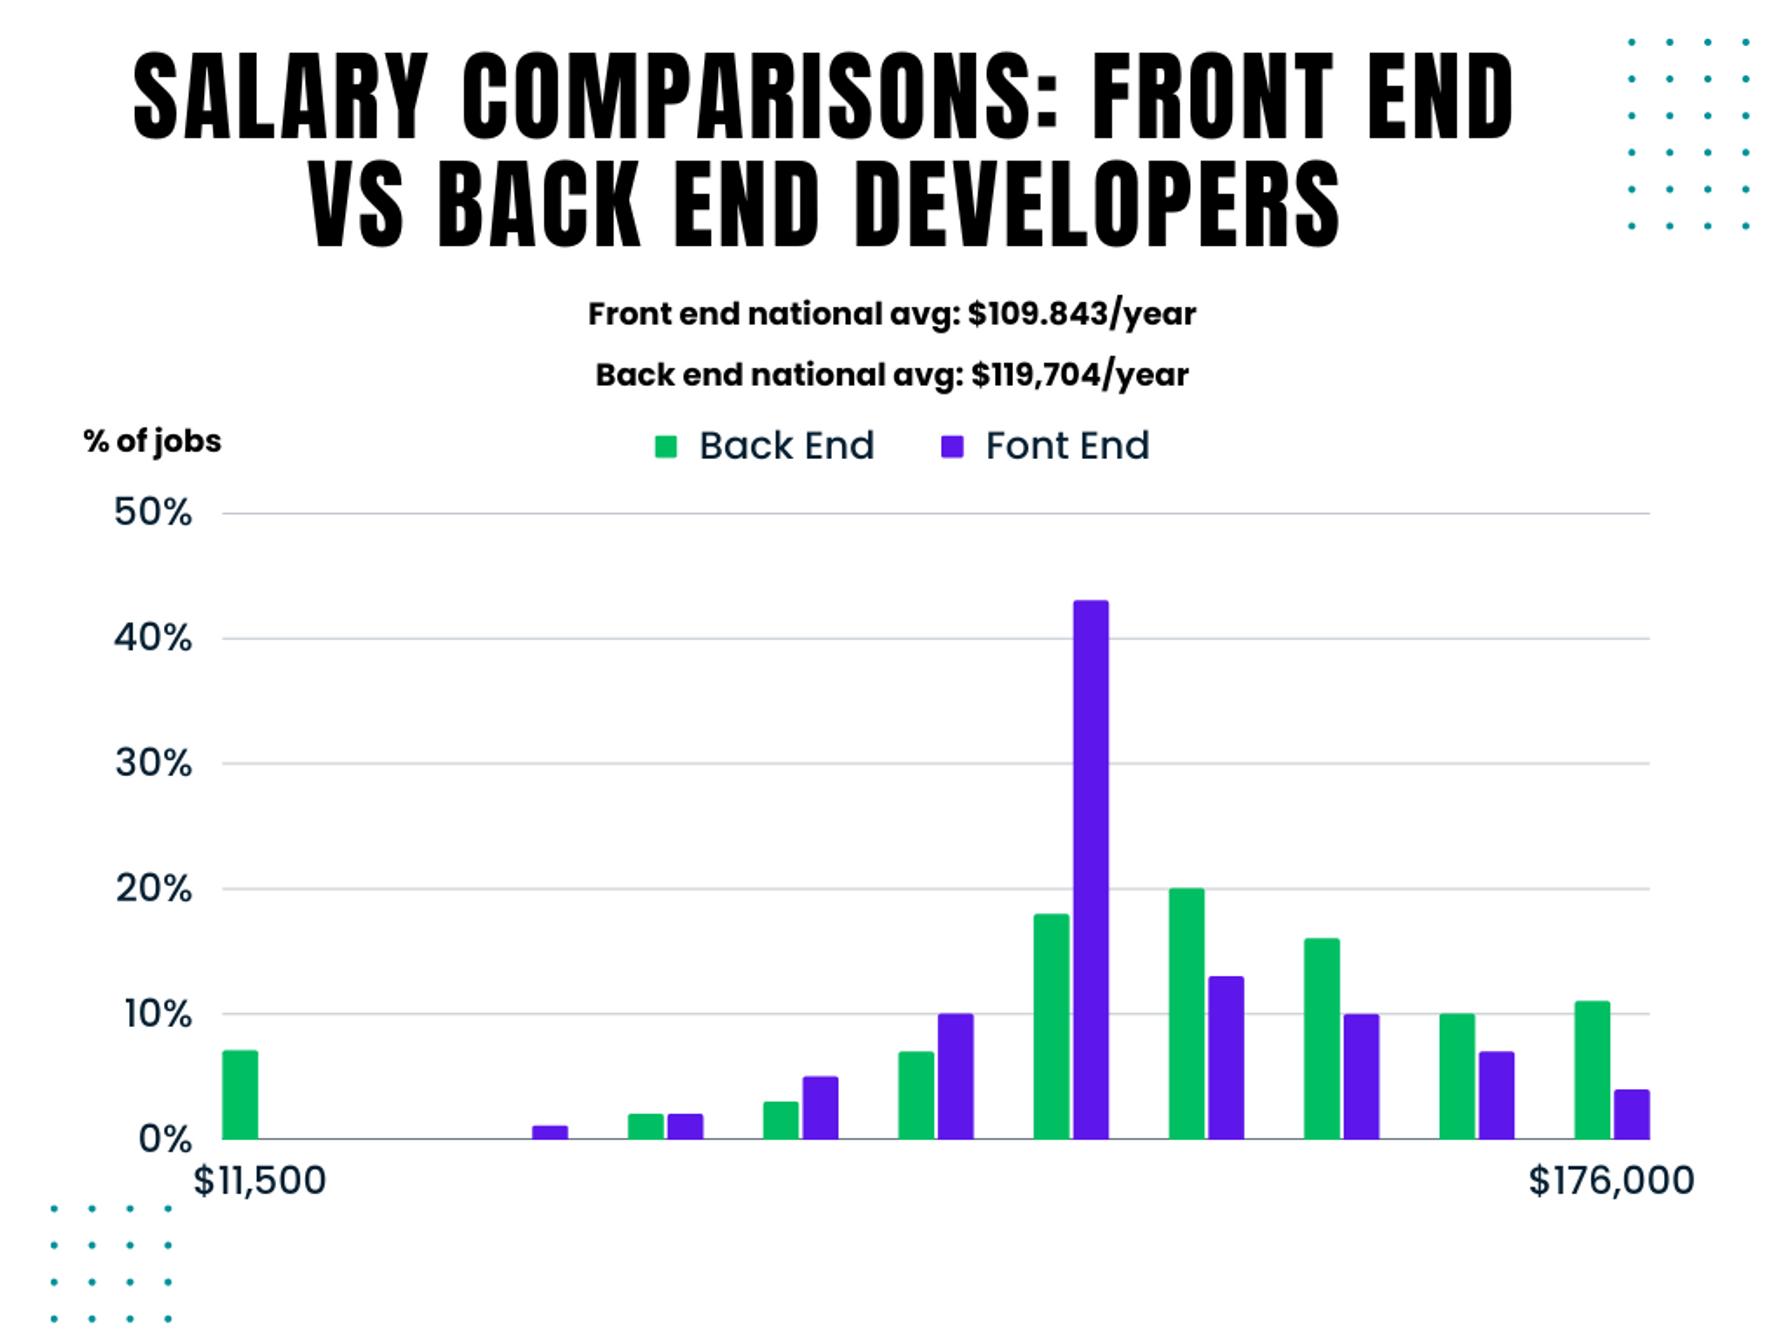 A graph showing the average annual salary of front end and back end developers.